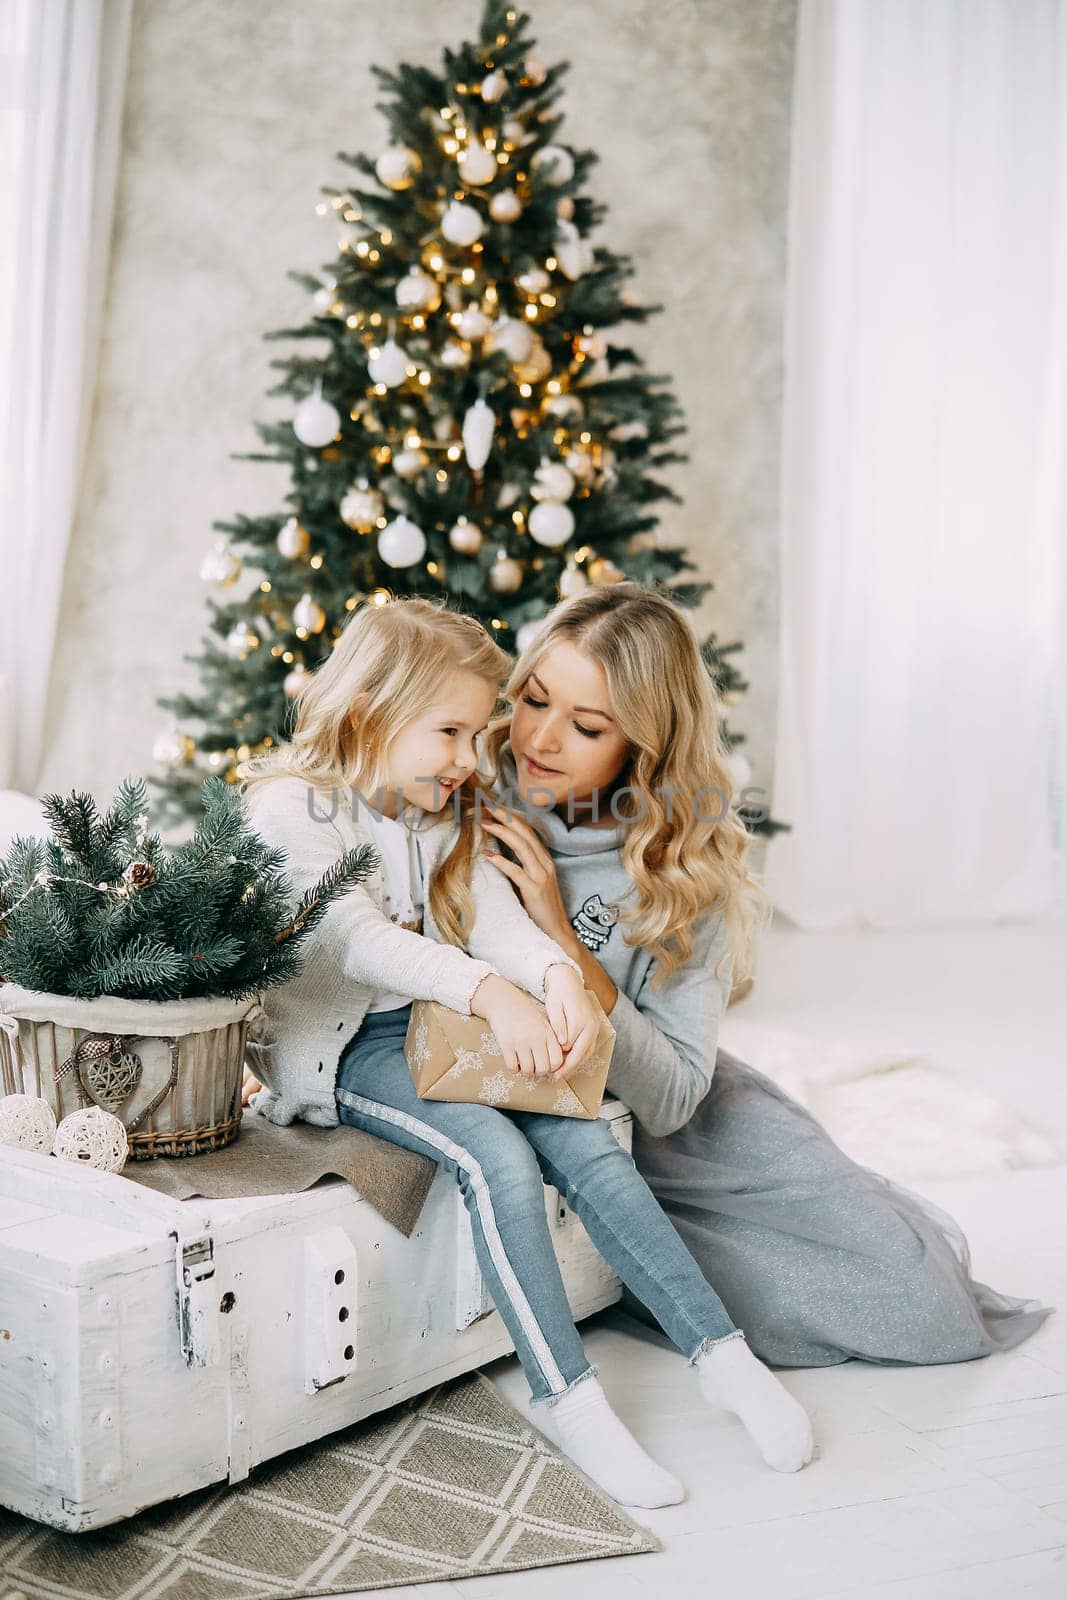 Happy family: mother and daughter. Family in a bright New Year's interior with a Christmas tree